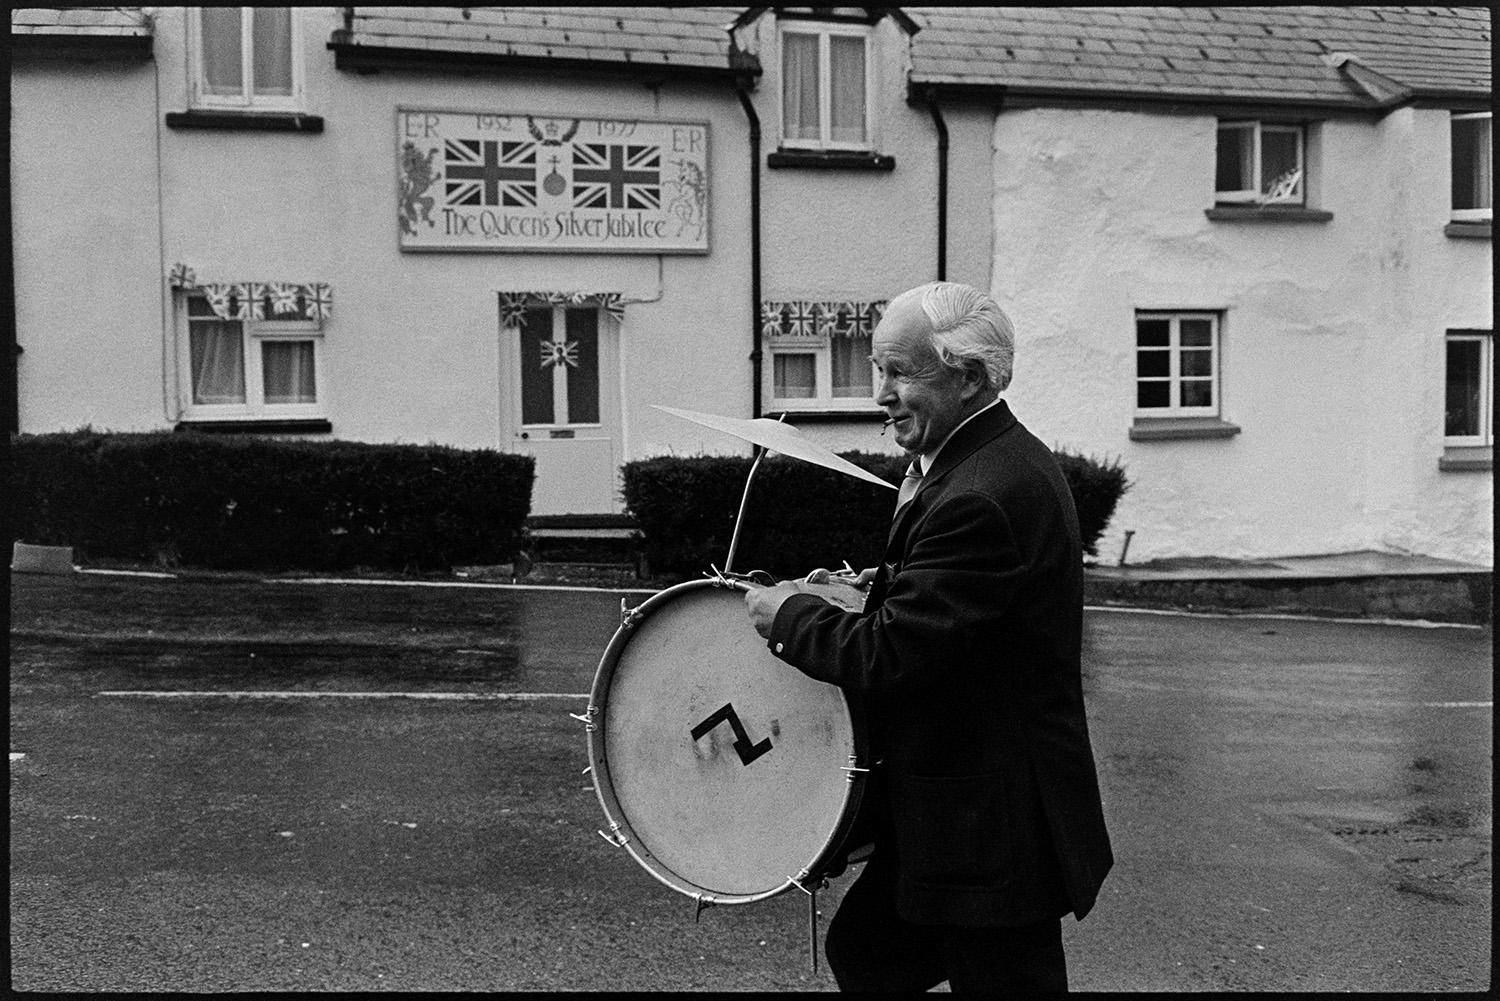 Bandsmen and choir ladies in street. 
[A man carrying a drum and cymbal in a street in Atherington. He is passing a cottage with a  sign above the door and flags celebrating the Silver Jubilee of Queen Elizabeth II.]